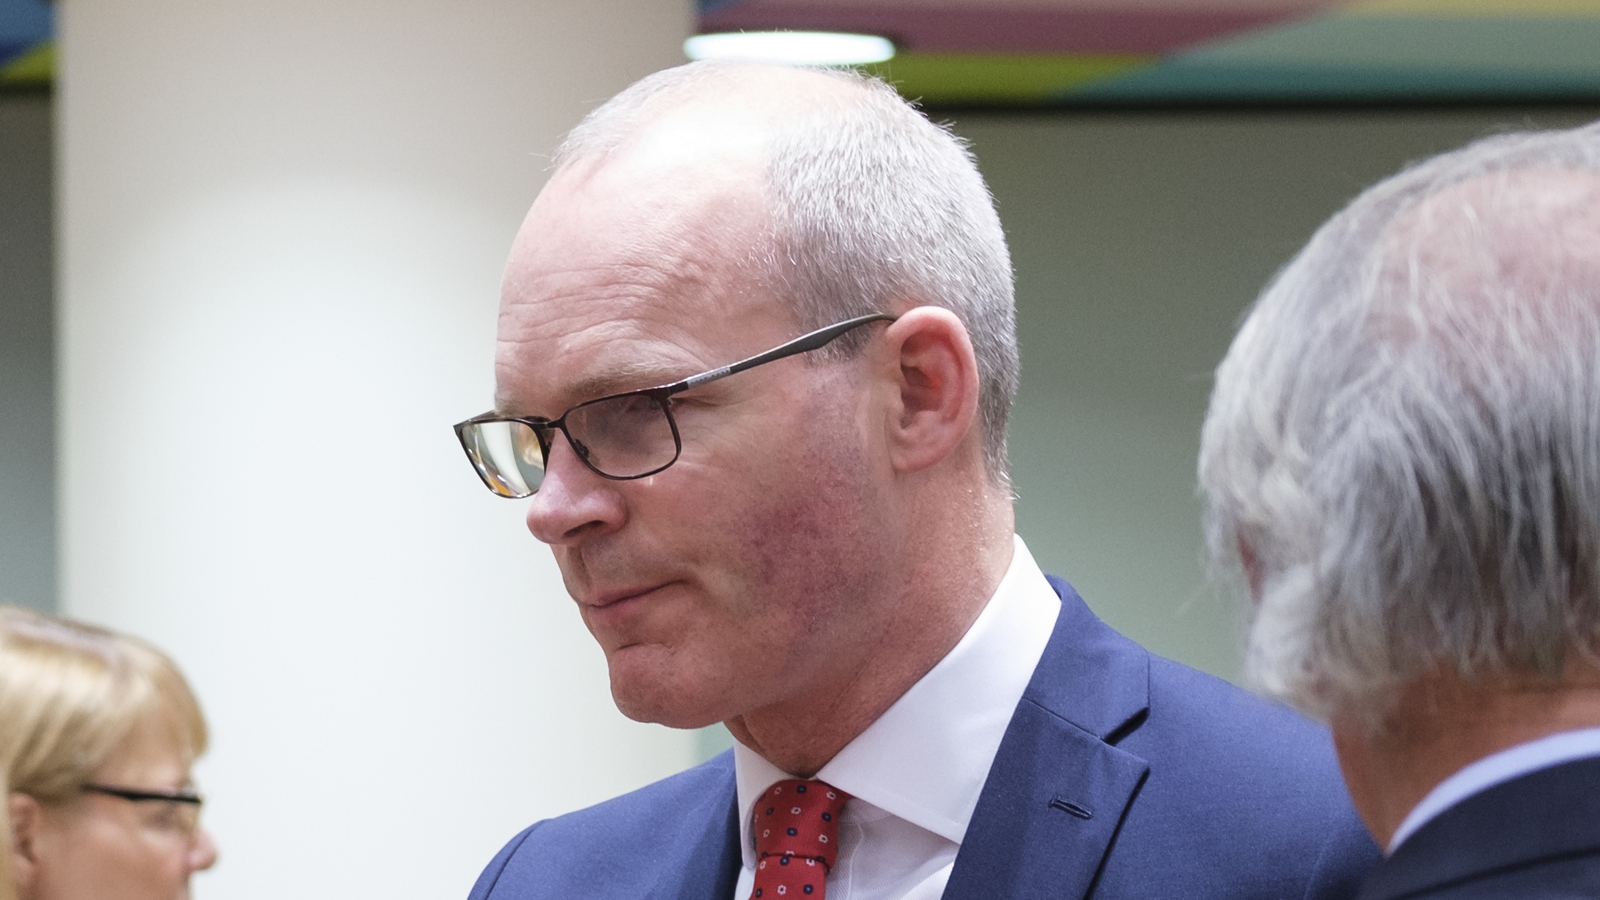 EU working hard on solutions to trade issues - Coveney